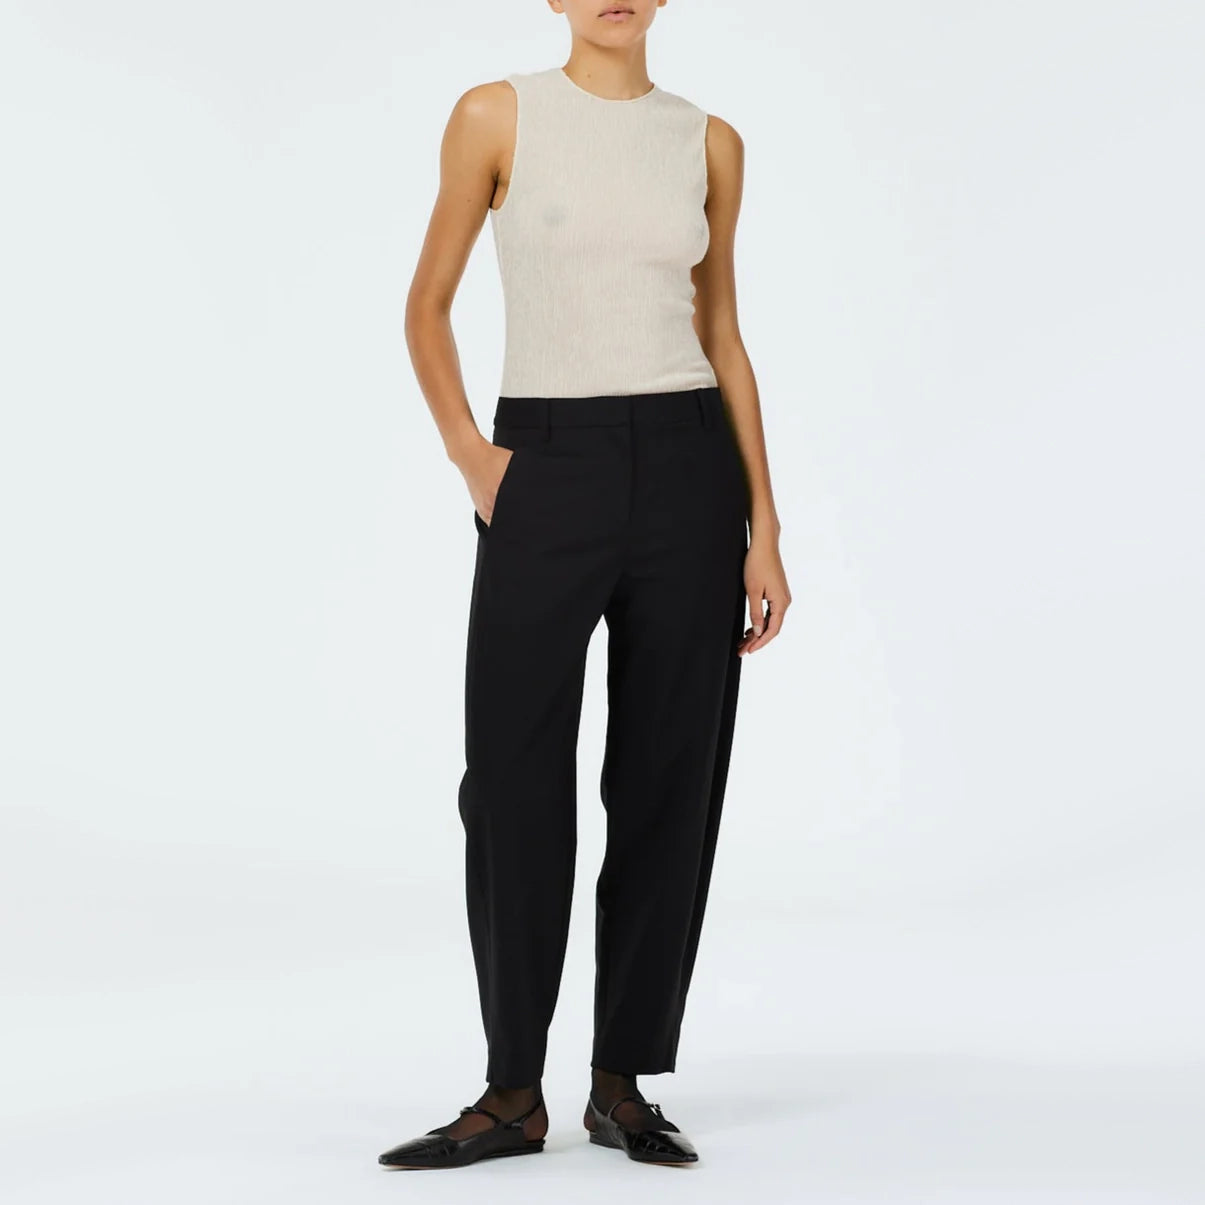 Tibi Sculpted Wool Trousers in Black, size 12